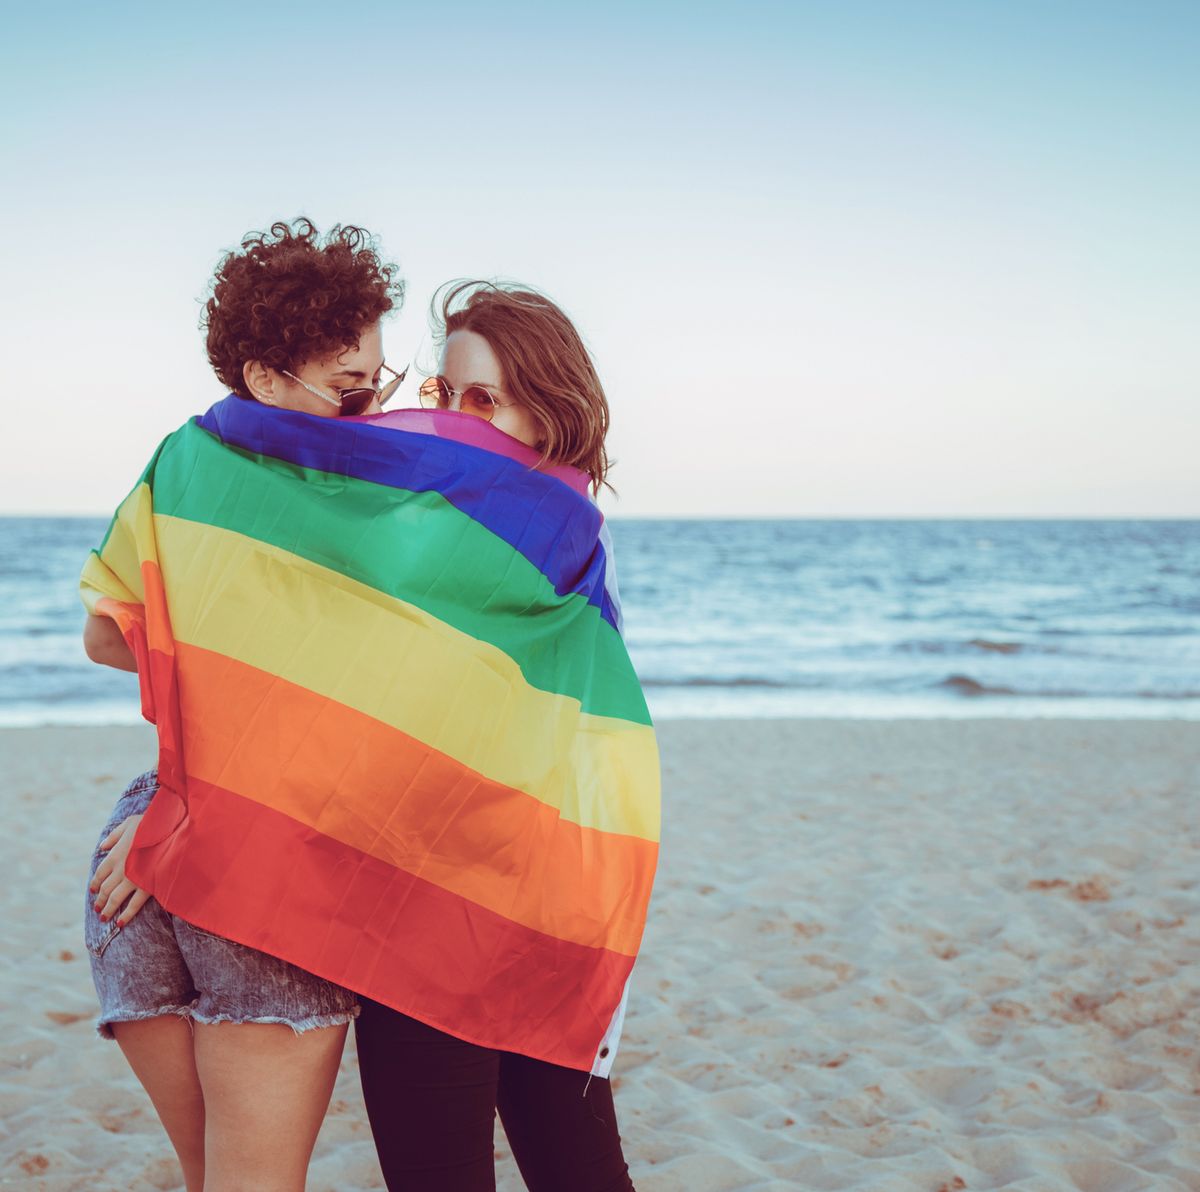 Hot Mom Nude Beach - Am I Bisexual?' 10 Bisexuality Signs, According To Experts